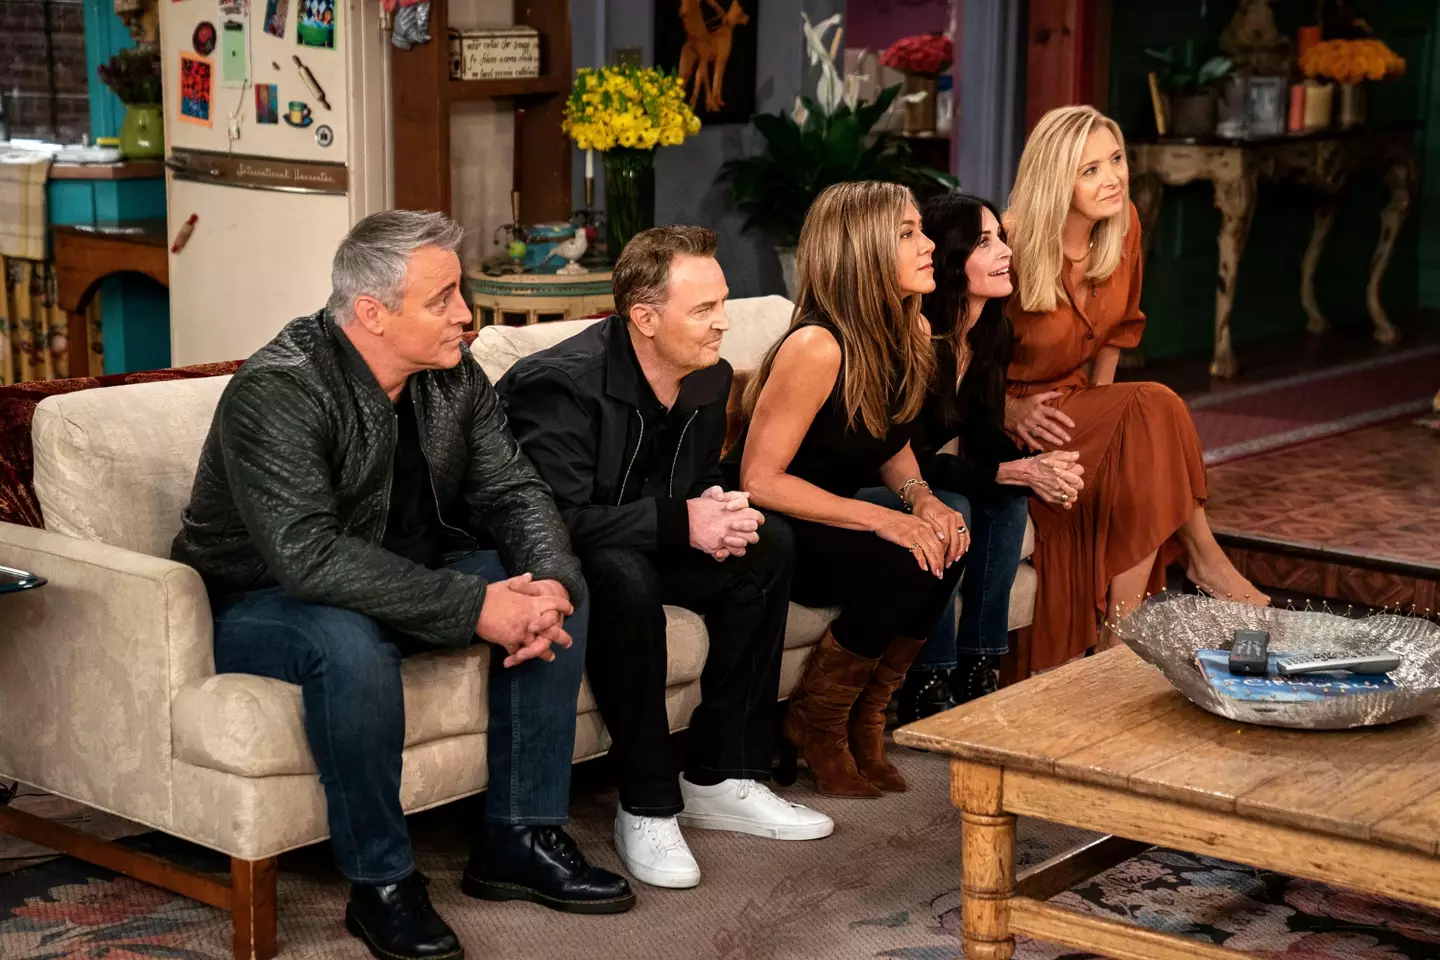 Kudrow recently appeared in the Friends reunion alongside the other main cast members.